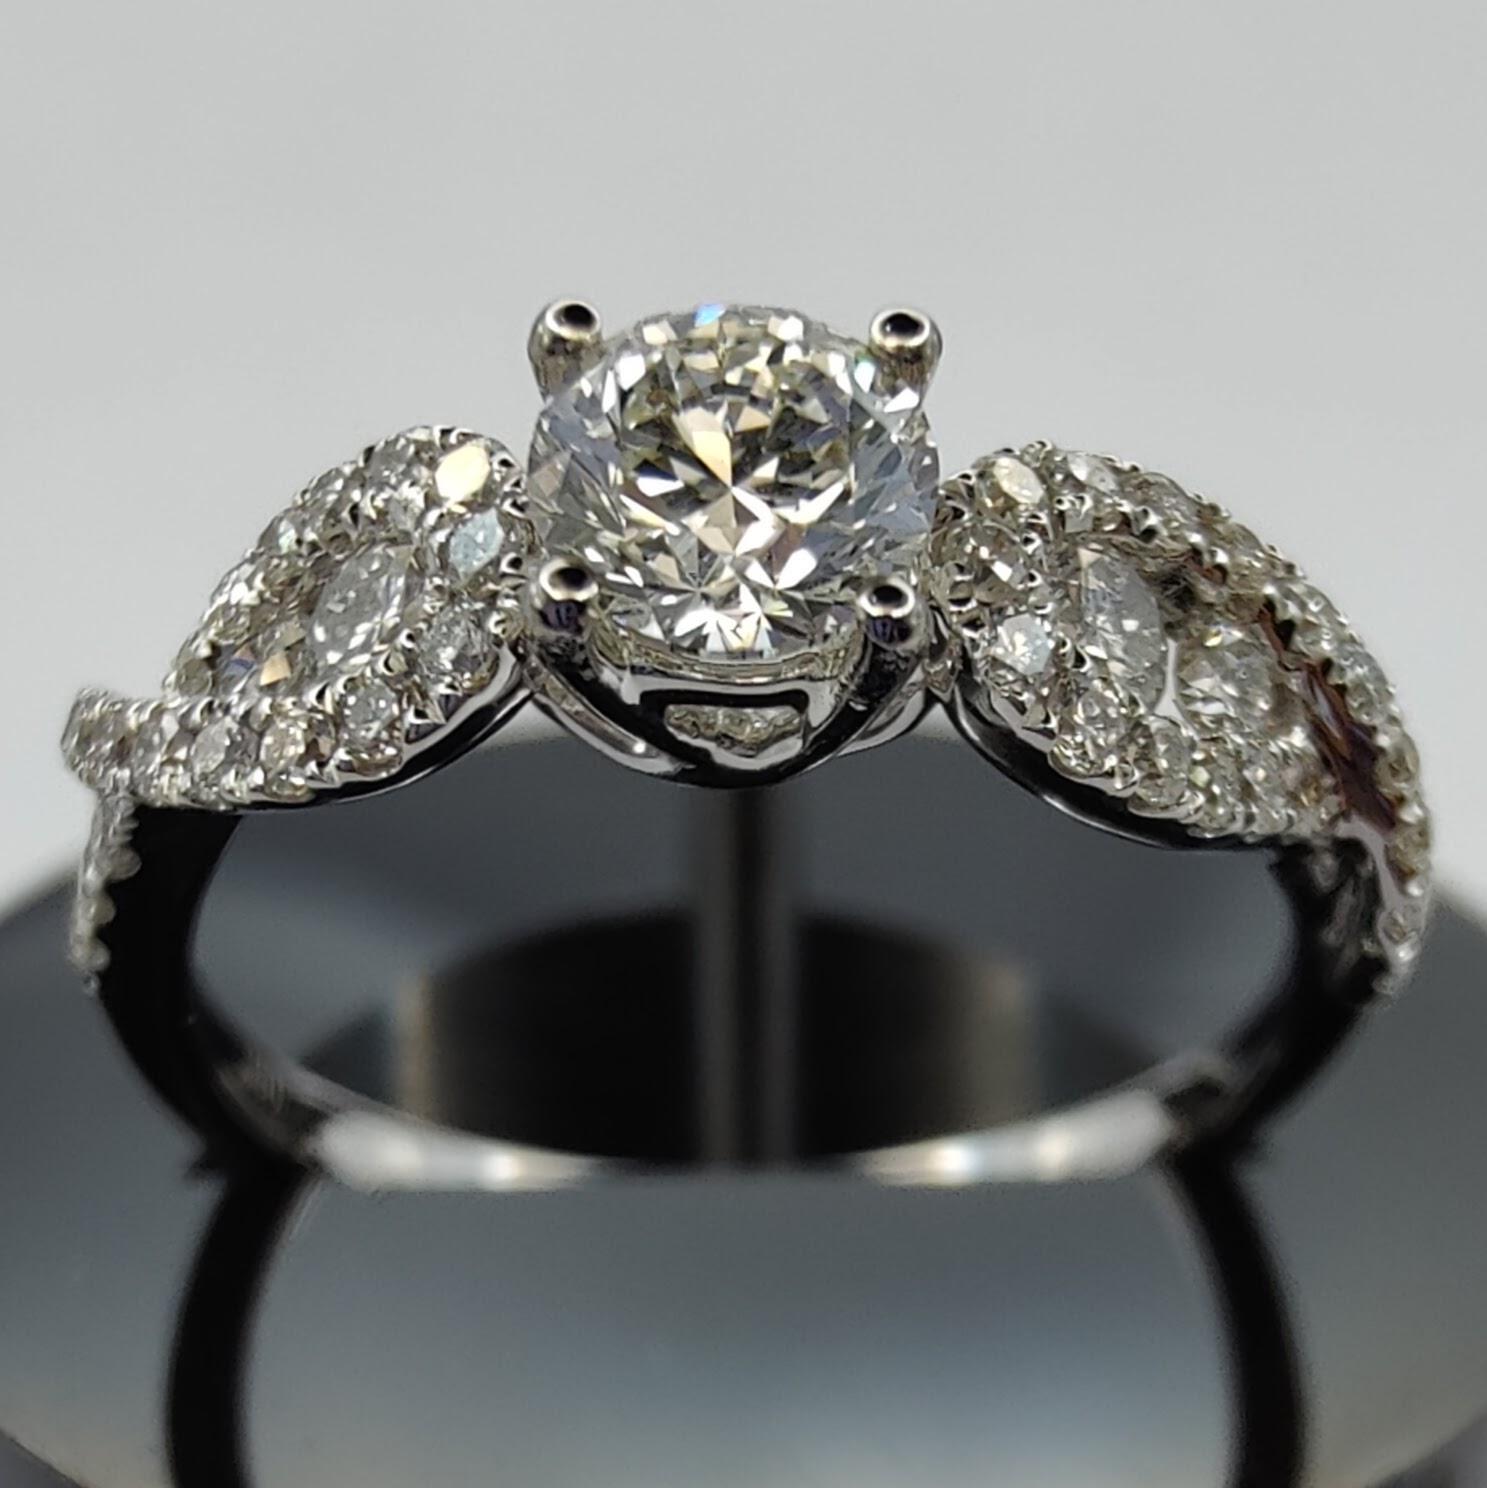 This gorgeous engagement ring is inspired by angel wings and features a stunning center diamond accompanied by two diamond wings. The round diamond at the center weighs 0.93ct and is GIA certified. The diamonds on the wings are expertly set in